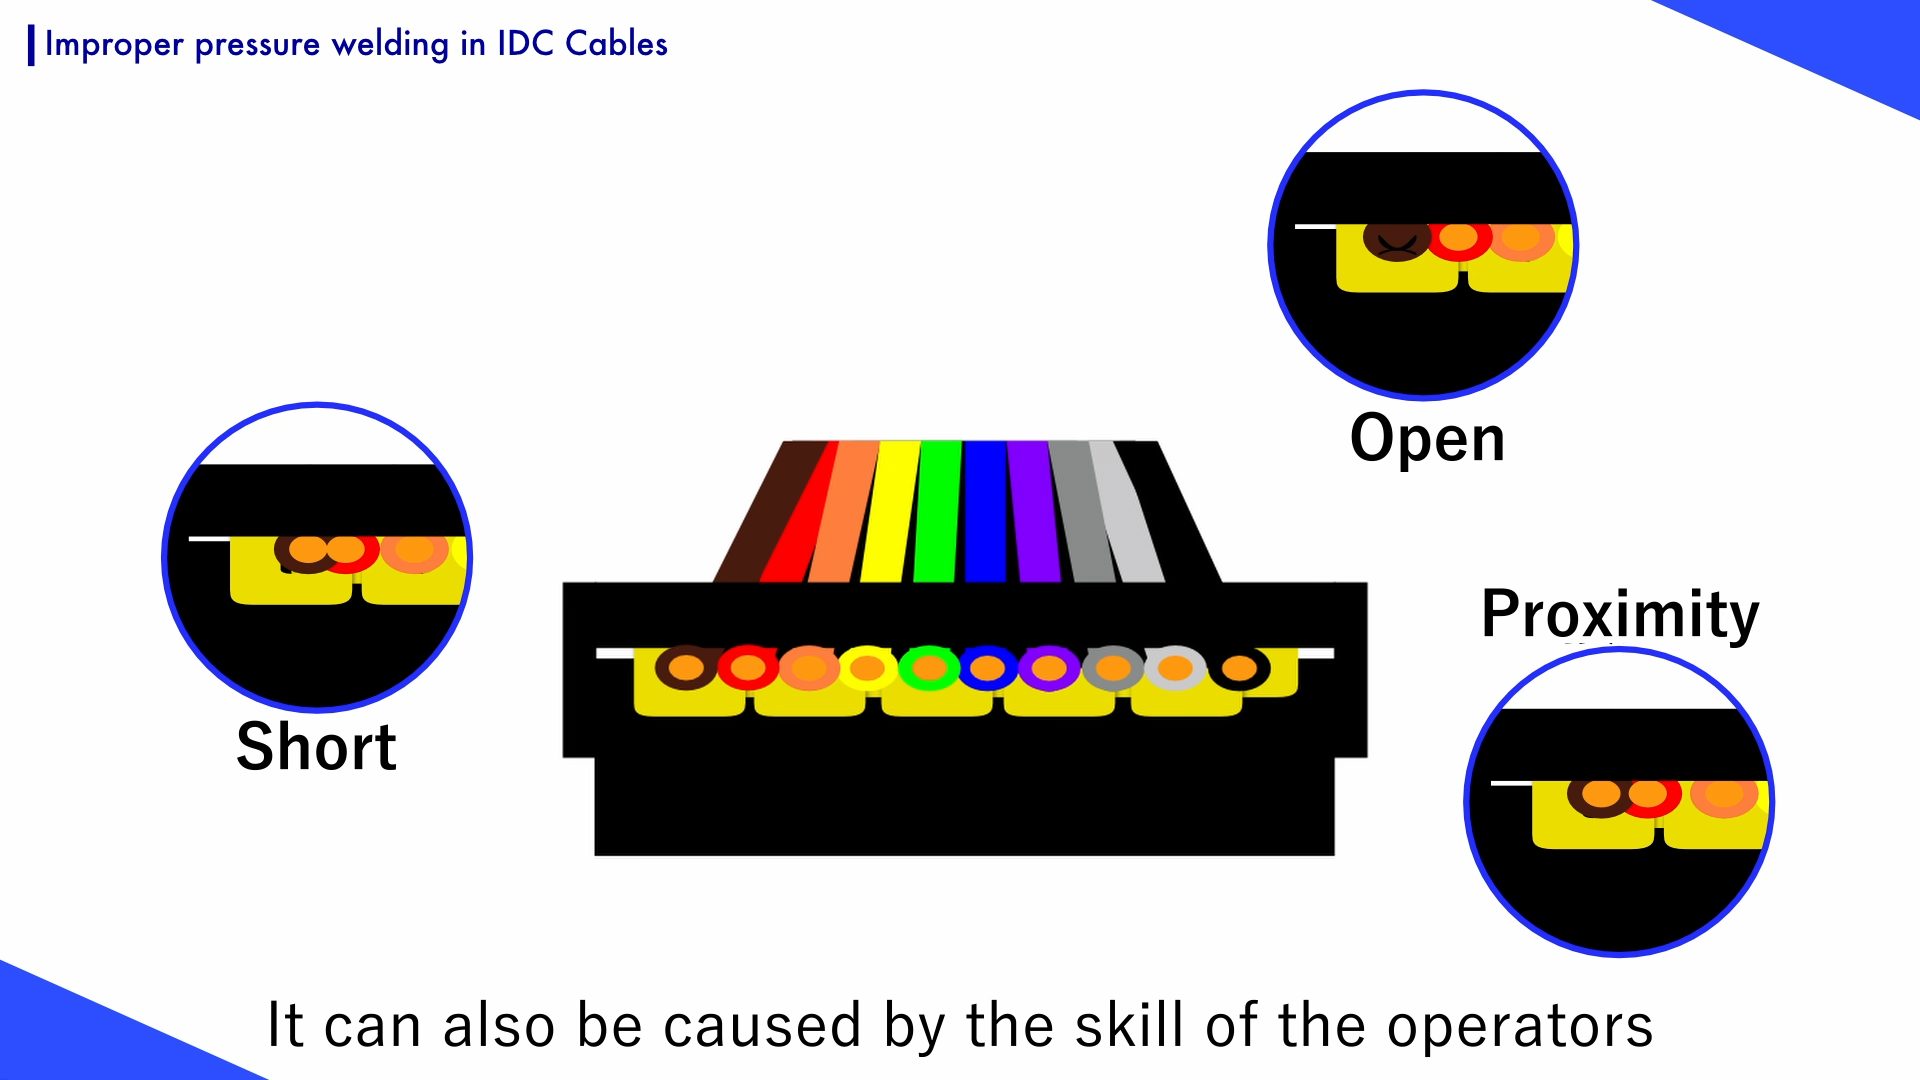 IDC cables with improper pressure welding can cause shorts, opens, and discharges